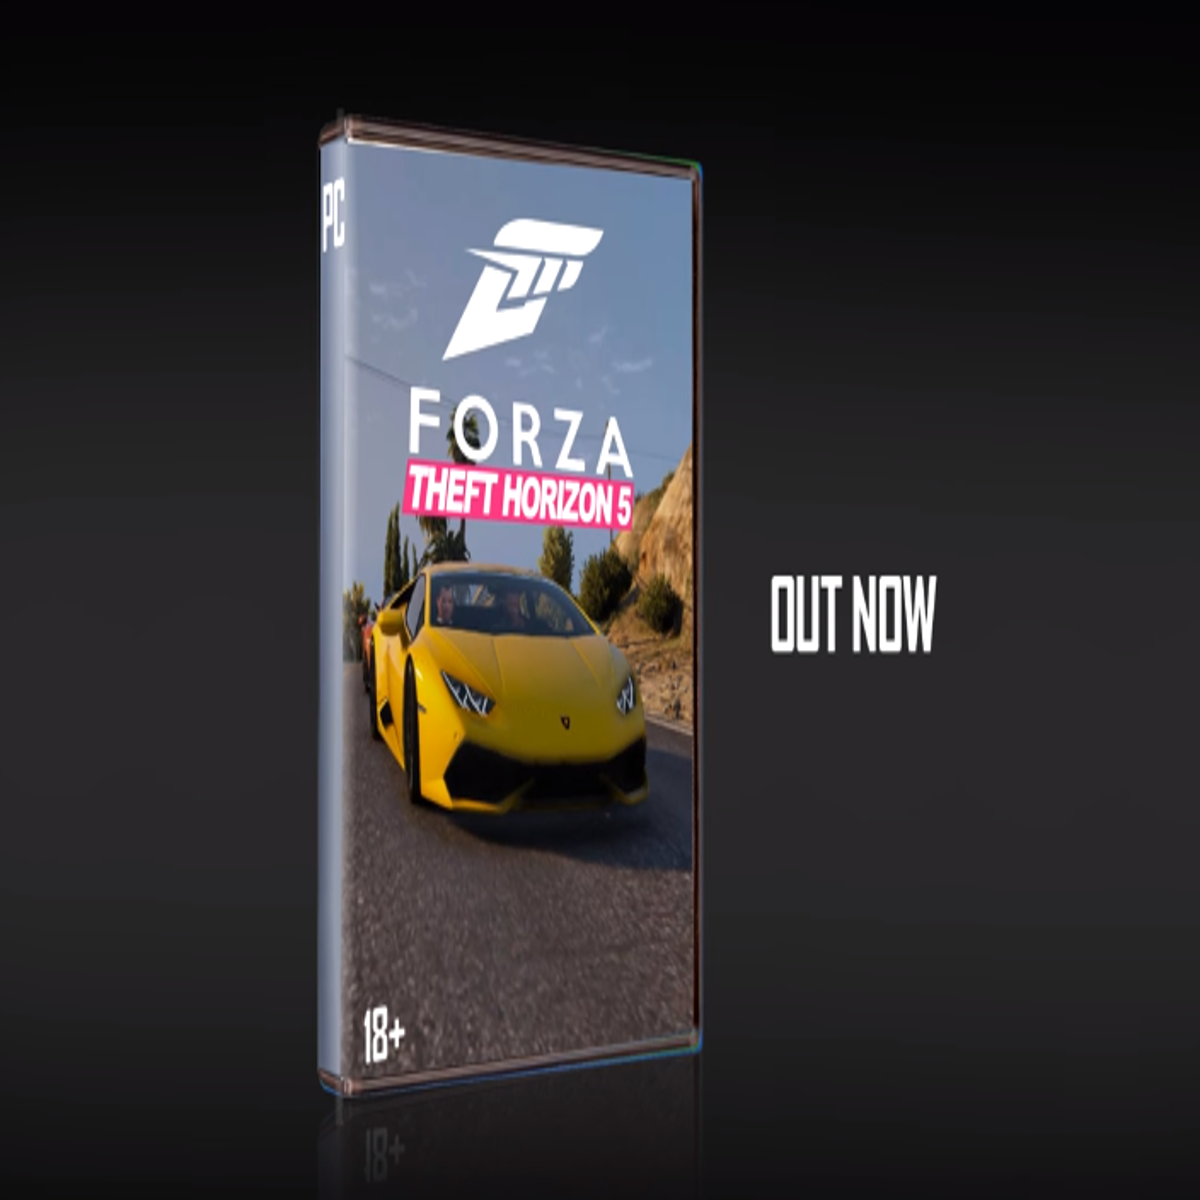 Forza Horizon 2 - Game Overview